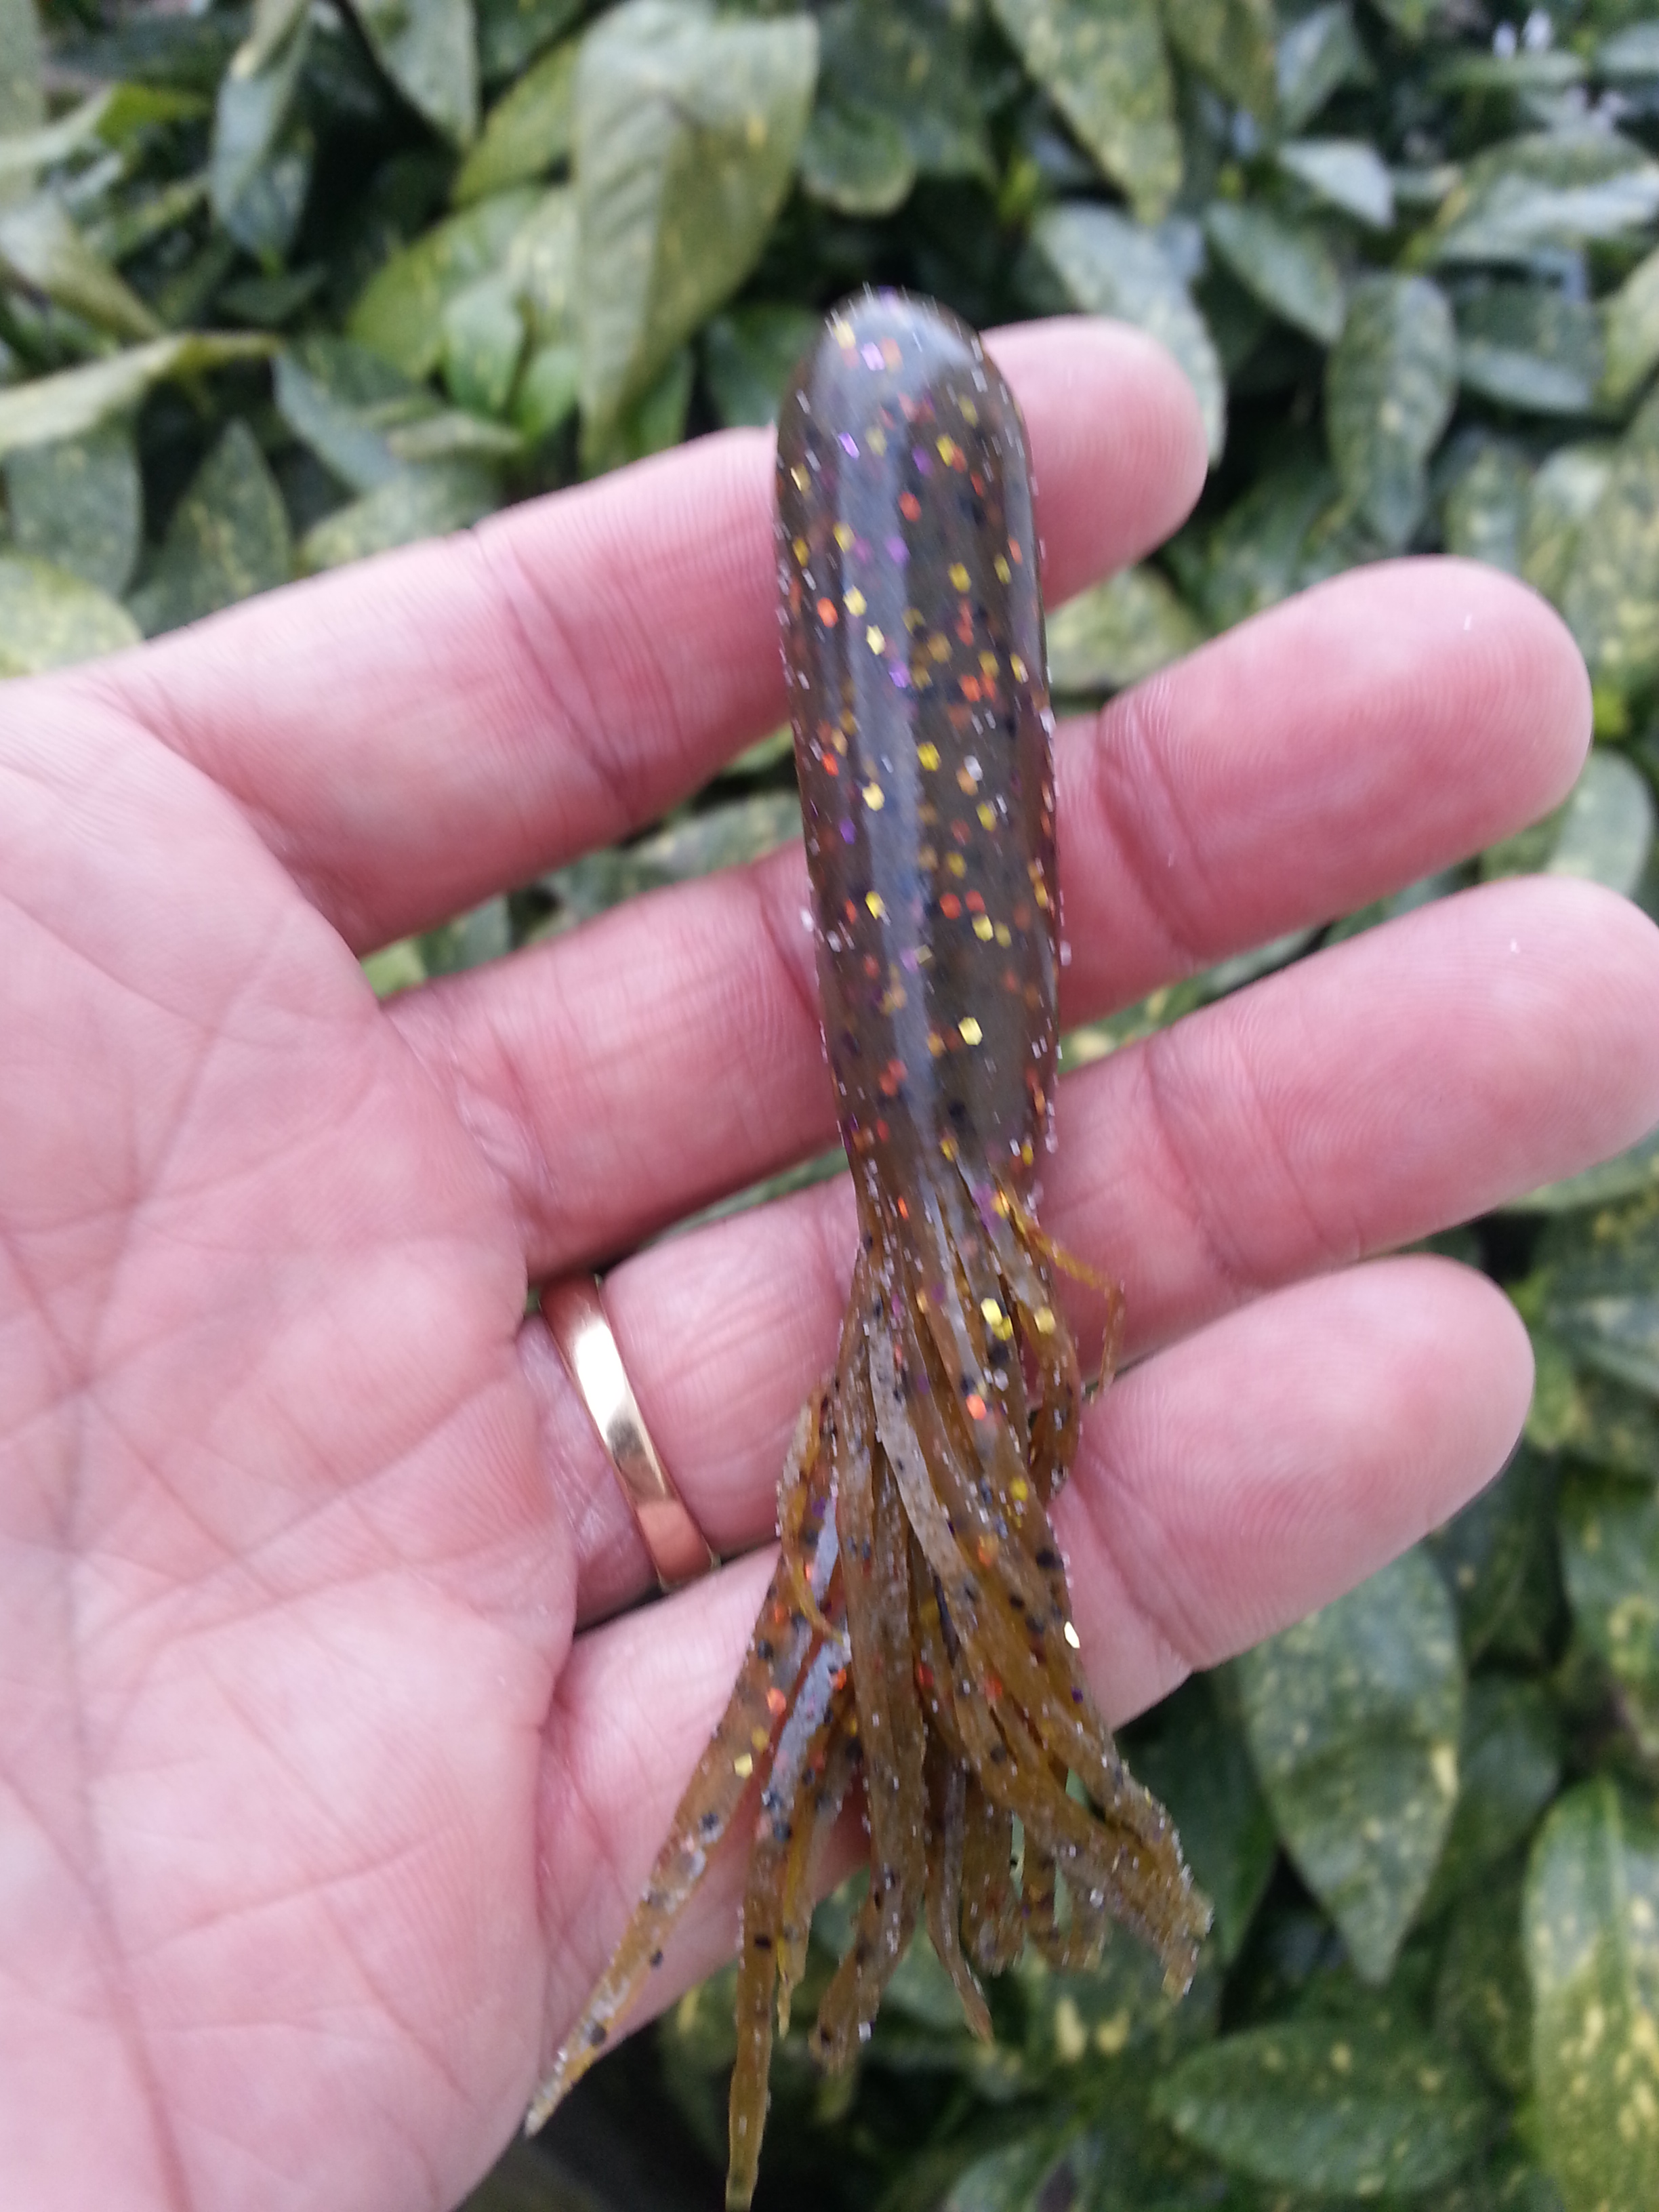 Smallie Fishing 101: Fishing Tube Jigs For Spring River Smallmouth